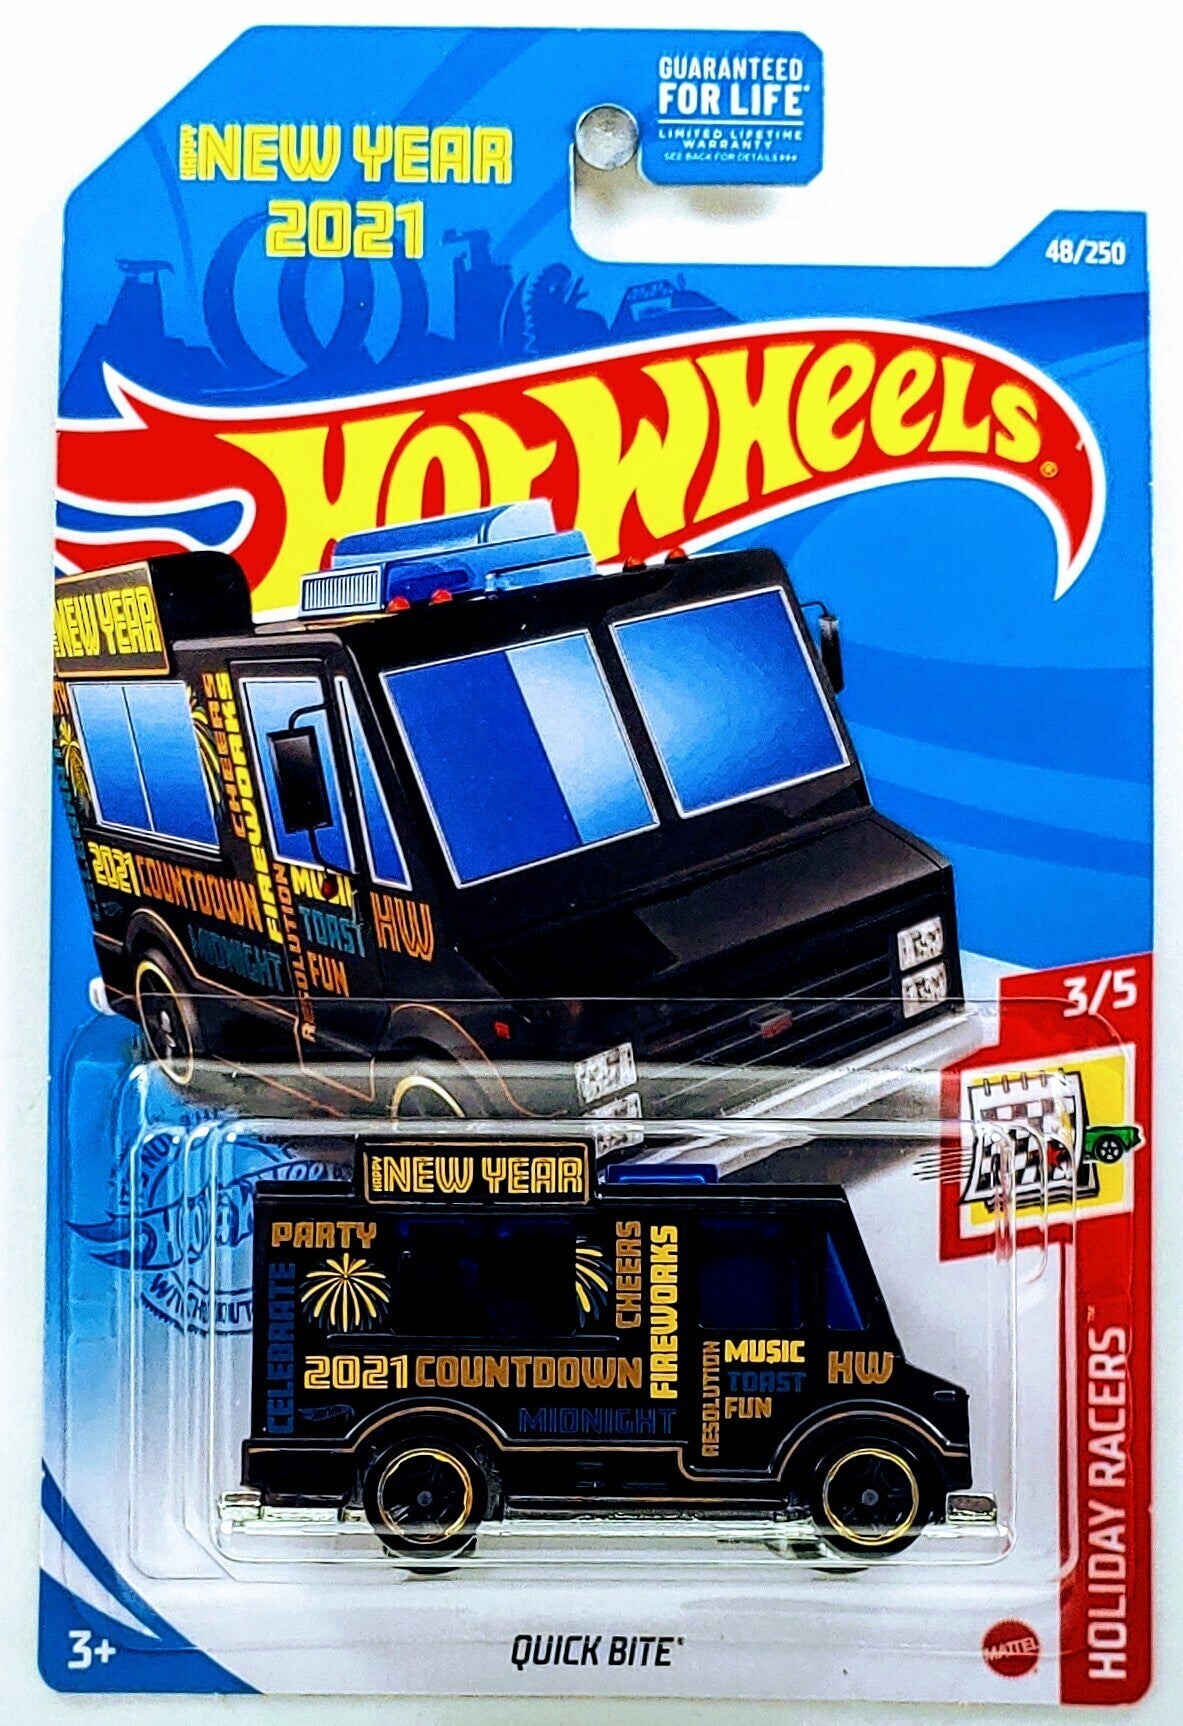 Hot Wheels 2021 - Collector # 048/250 - Holiday Racers 3/5 - Quick Bite - Black / Happy New Year